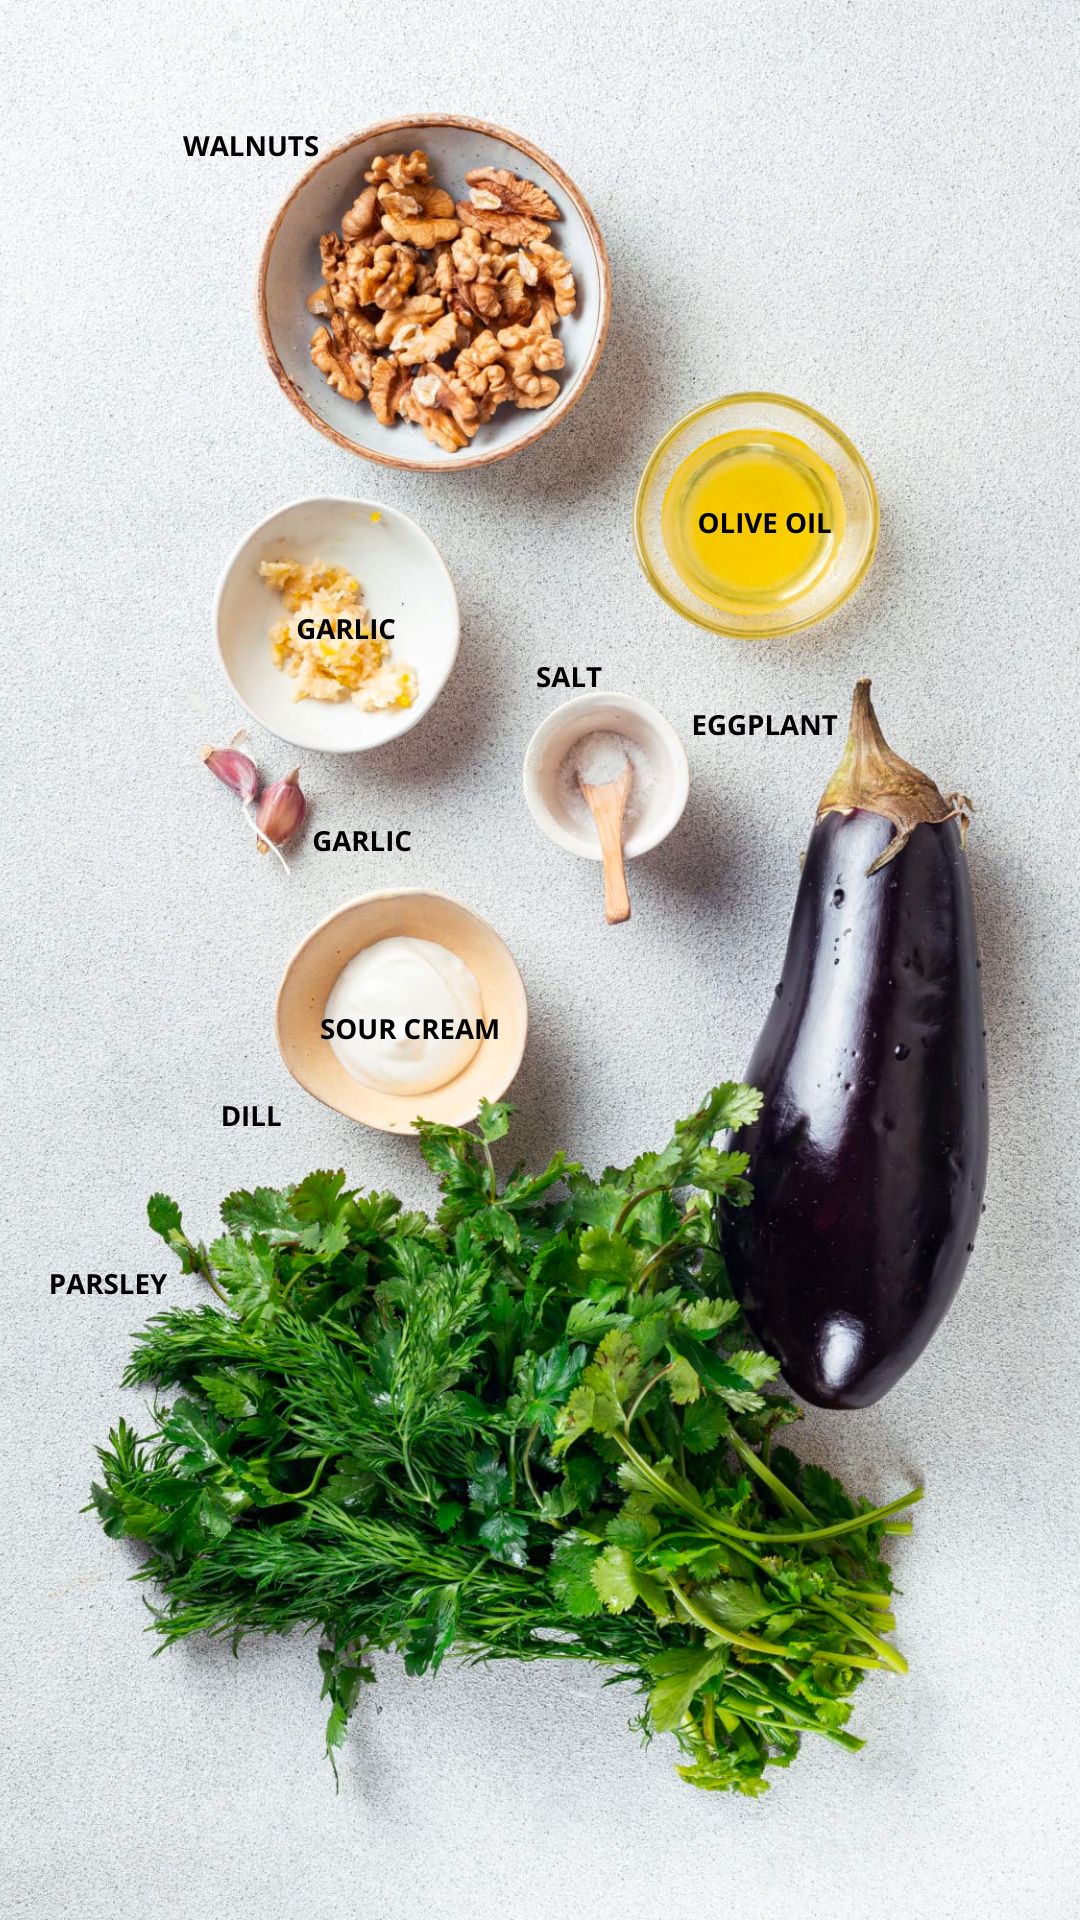 herb and eggplant appetizer ingredients walnuts, olive oil, eggplant, salt, garlic, sour cream, dill, and parsley.